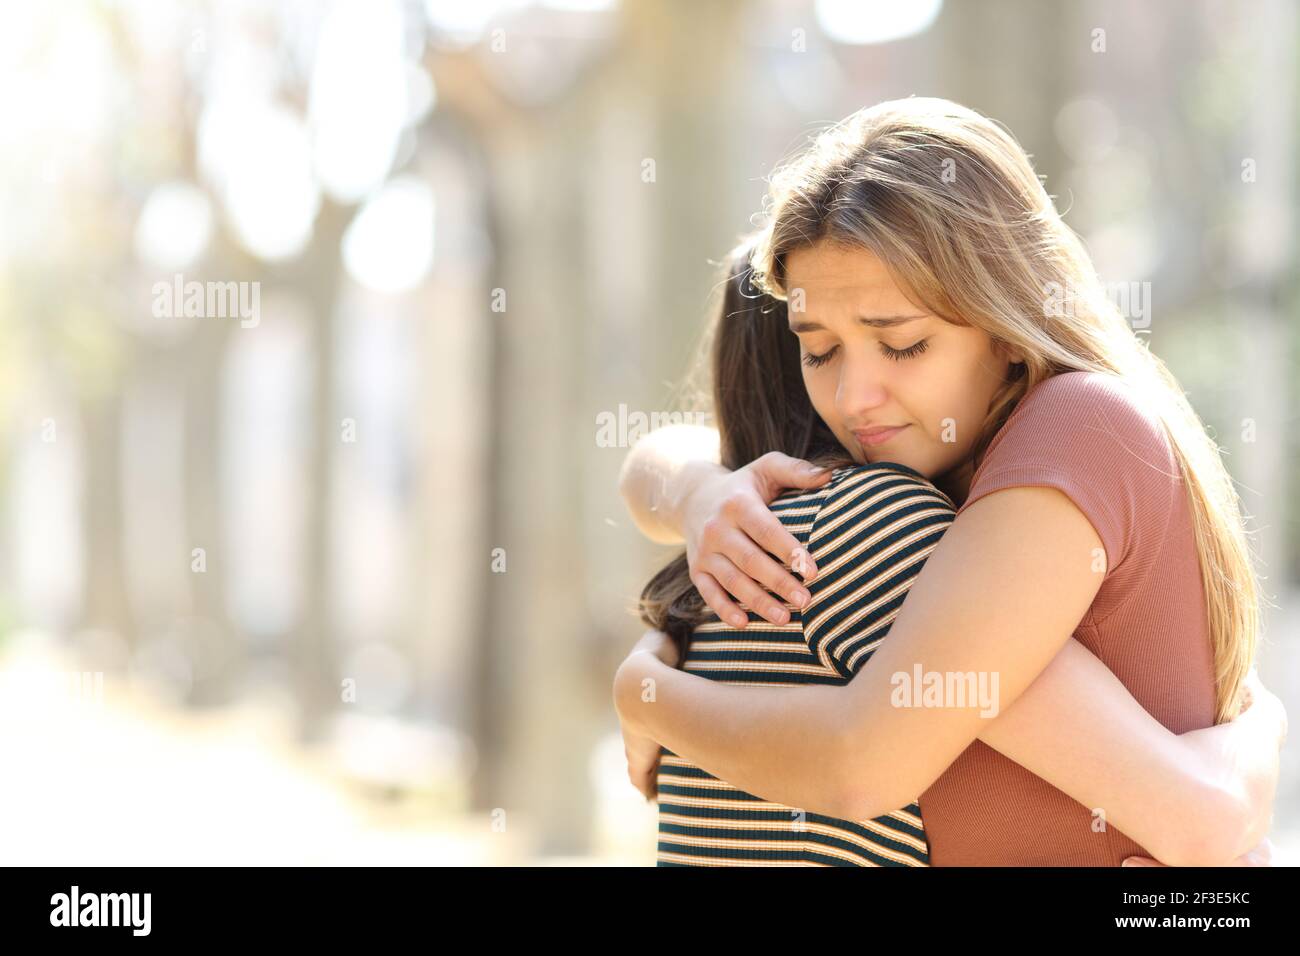 Regretful woman embracing a friend reconciliating in the street Stock Photo